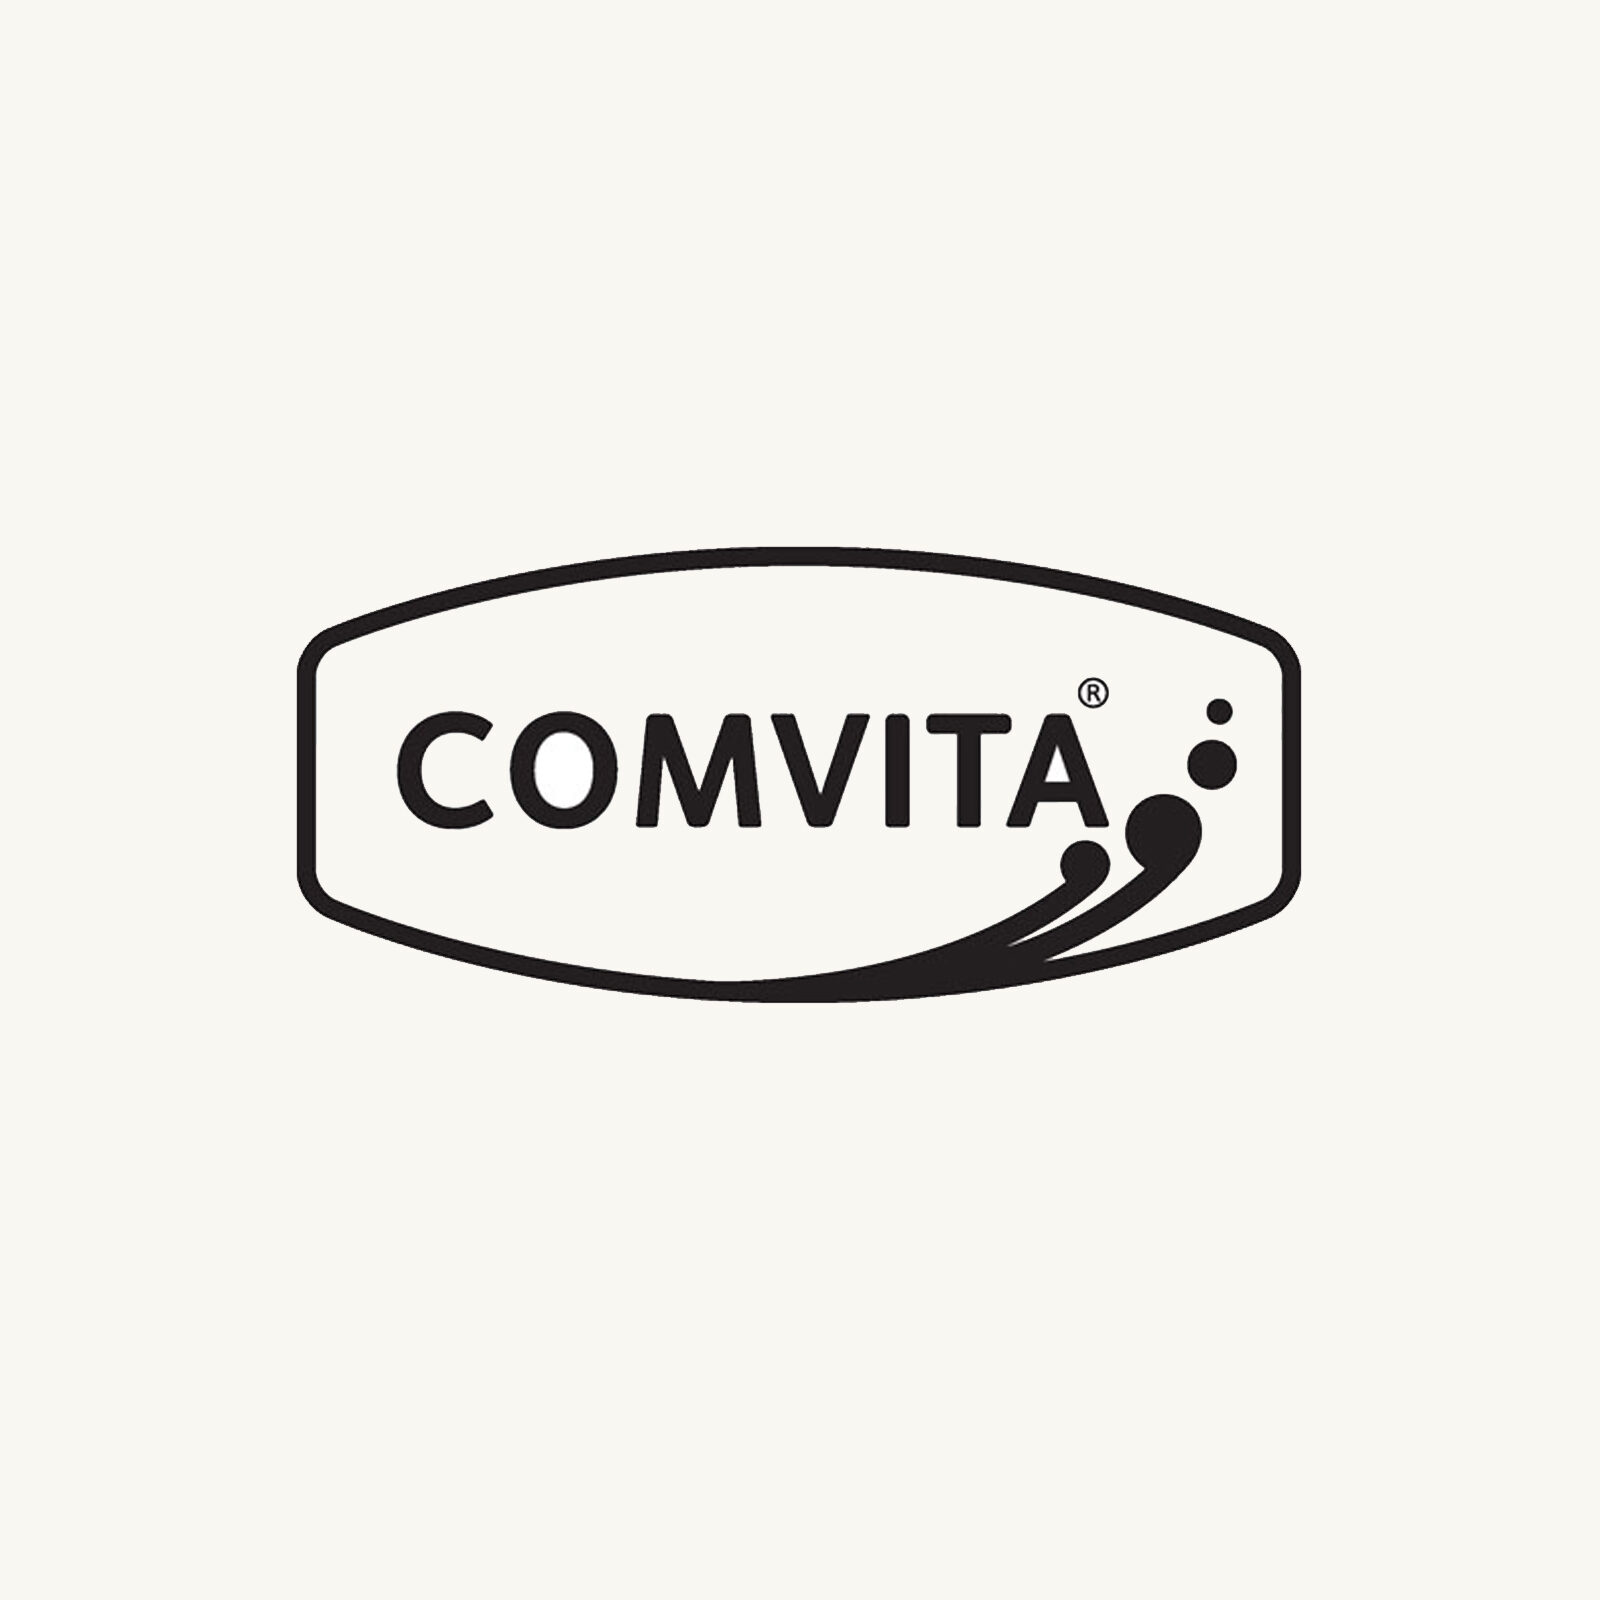 TJ Wentzel appointed as Commercial Analyst at Comvita